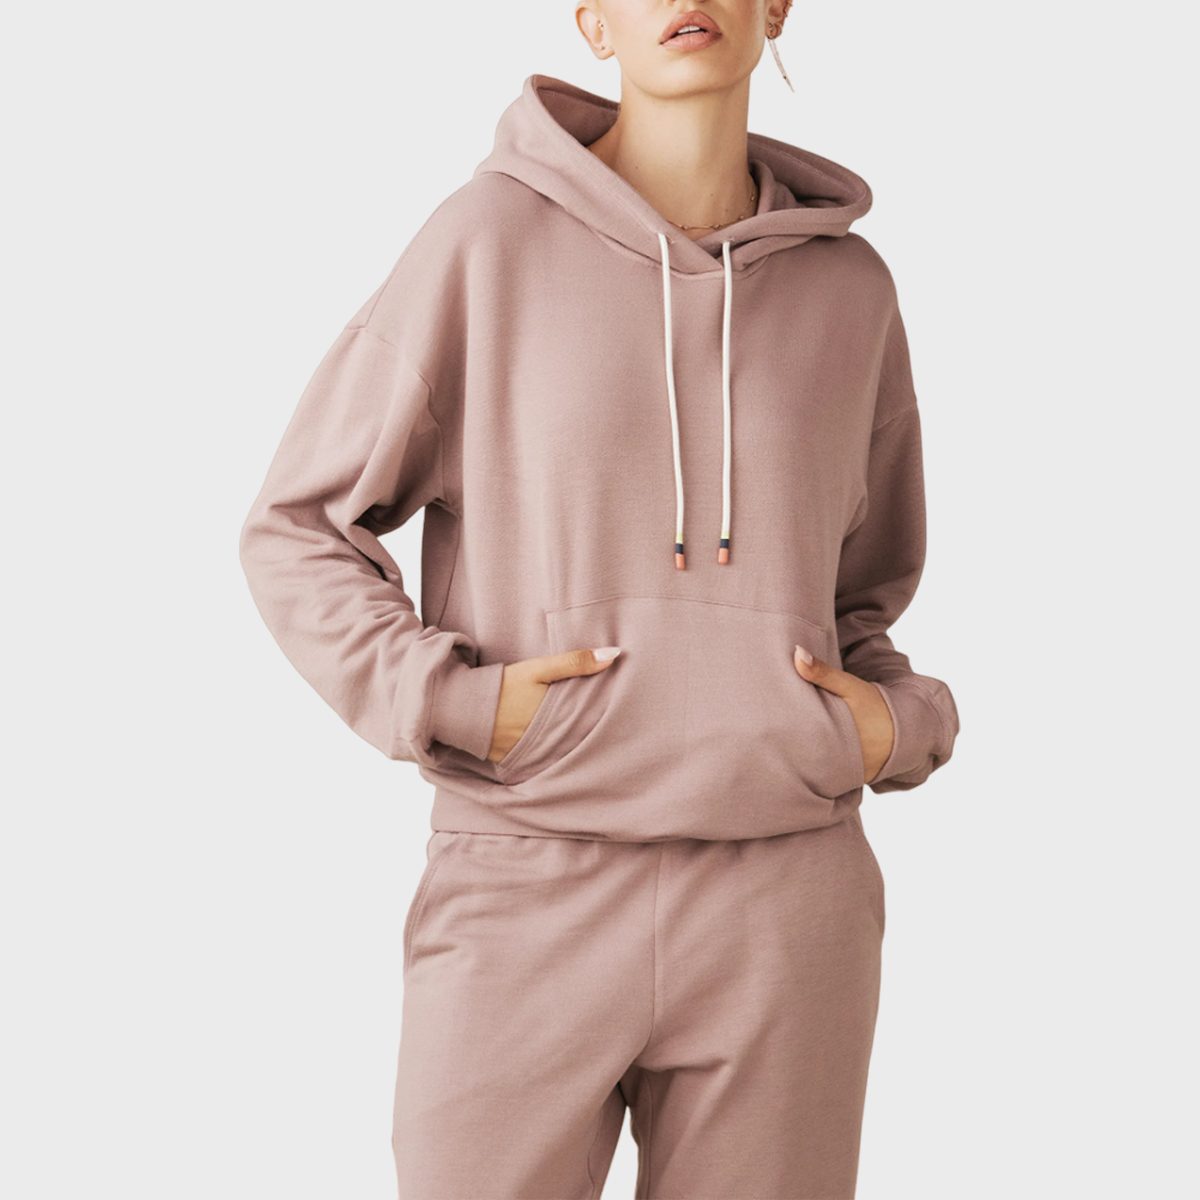 <p>Is there any girl out there who doesn't love a cozy sweatshirt? Loungewear lovers will live in this <a href="https://losano.com/products/monterey-hoodie-pebble" rel="noopener noreferrer">buttery soft hoodie</a>. Made from super soft modal and organic cotton, this sweatshirt and the <a href="https://losano.com/products/monterey-jogger-pebble" rel="noopener noreferrer">matching joggers</a> will be her go-to <a href="https://www.rd.com/article/best-loungewear-sets/" rel="noopener noreferrer">loungewear</a> from here on out.</p> <p class="listicle-page__cta-button-shop"><a class="shop-btn" href="https://losano.com/products/monterey-hoodie-pebble">Shop Now</a></p>